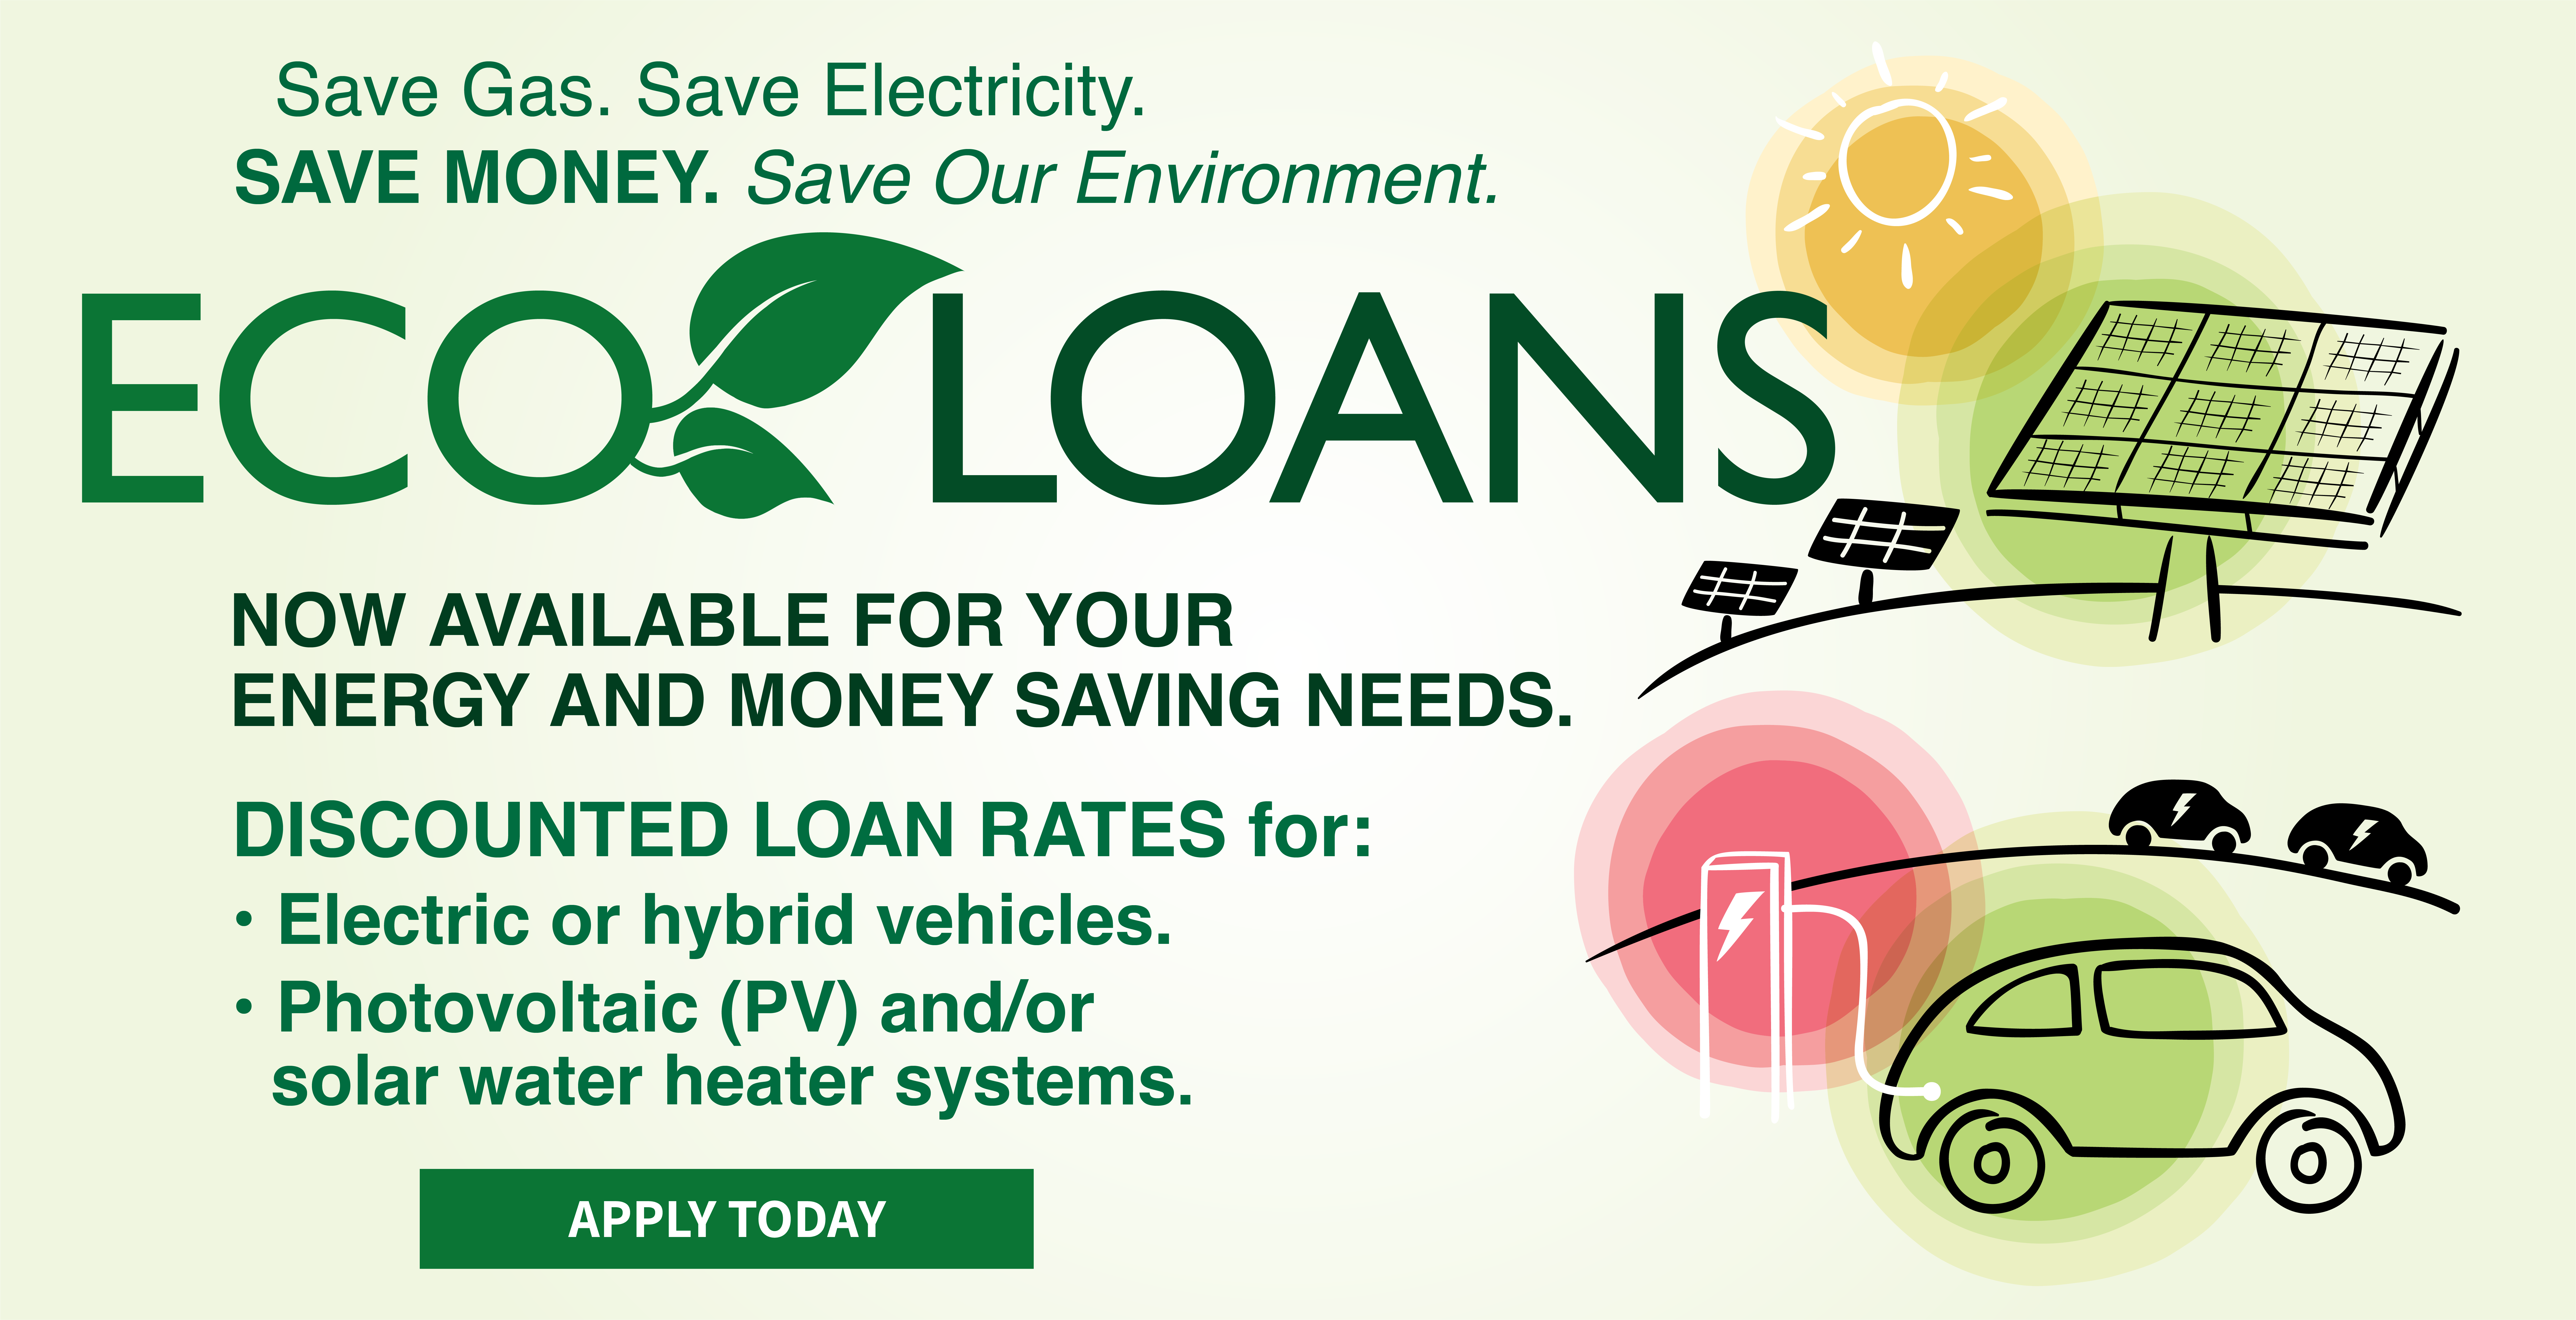 Eco loans now available for your energy saving needs. discounted loan rate for electric or hybrid vehicles or photovoltaic (pv) and/or solar water heater systems. Apply Today.